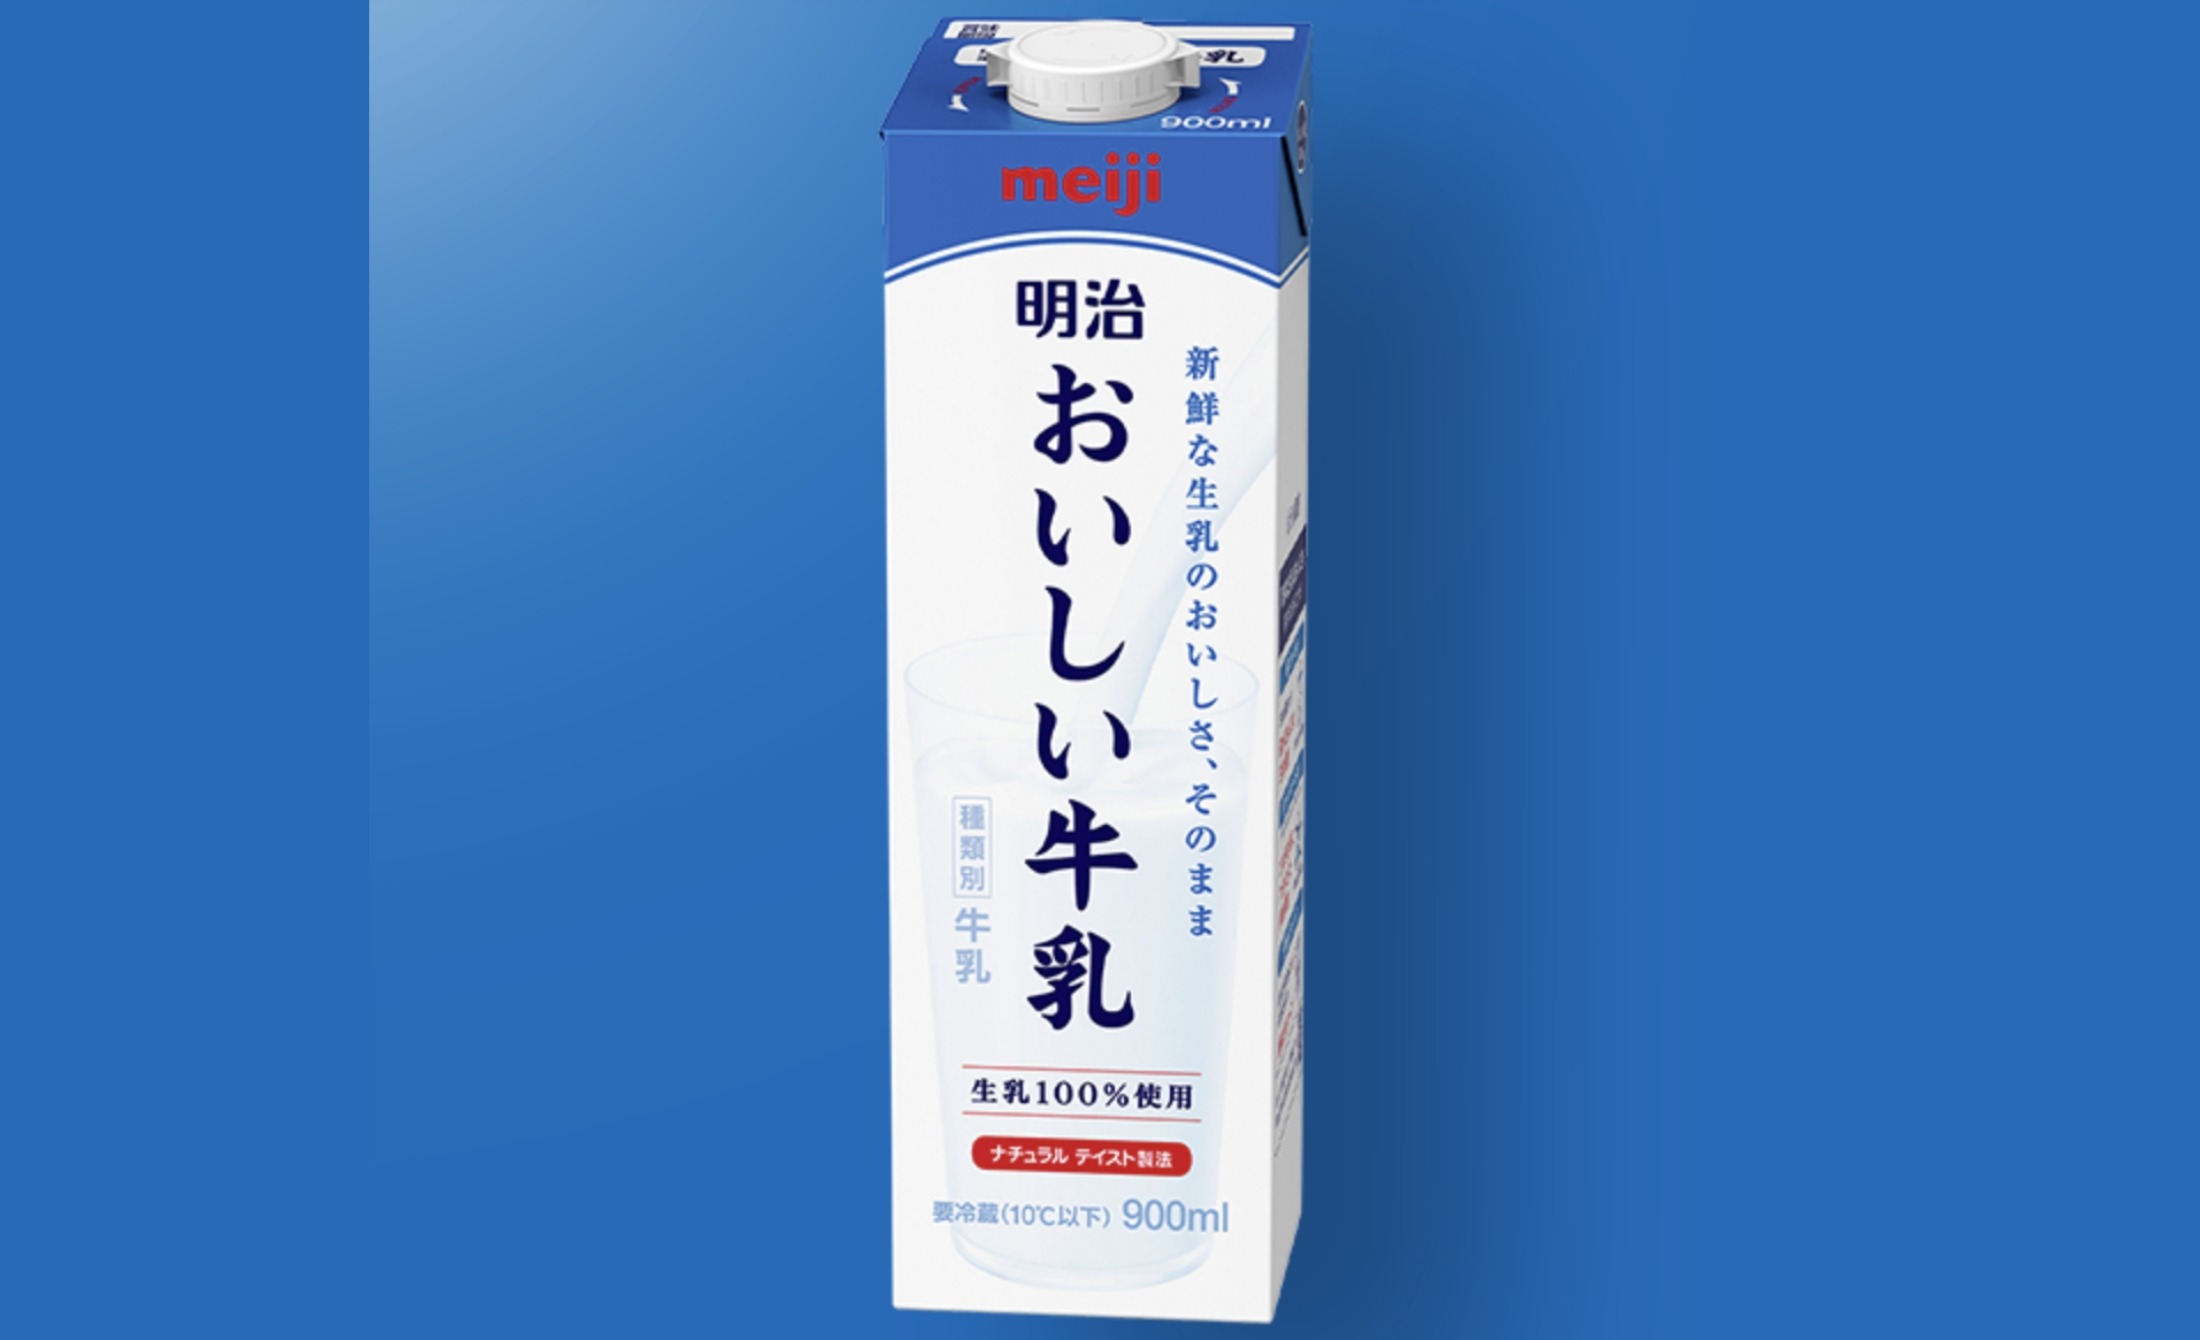 would-you-like-to-choose-a-sustainable-milk-carton